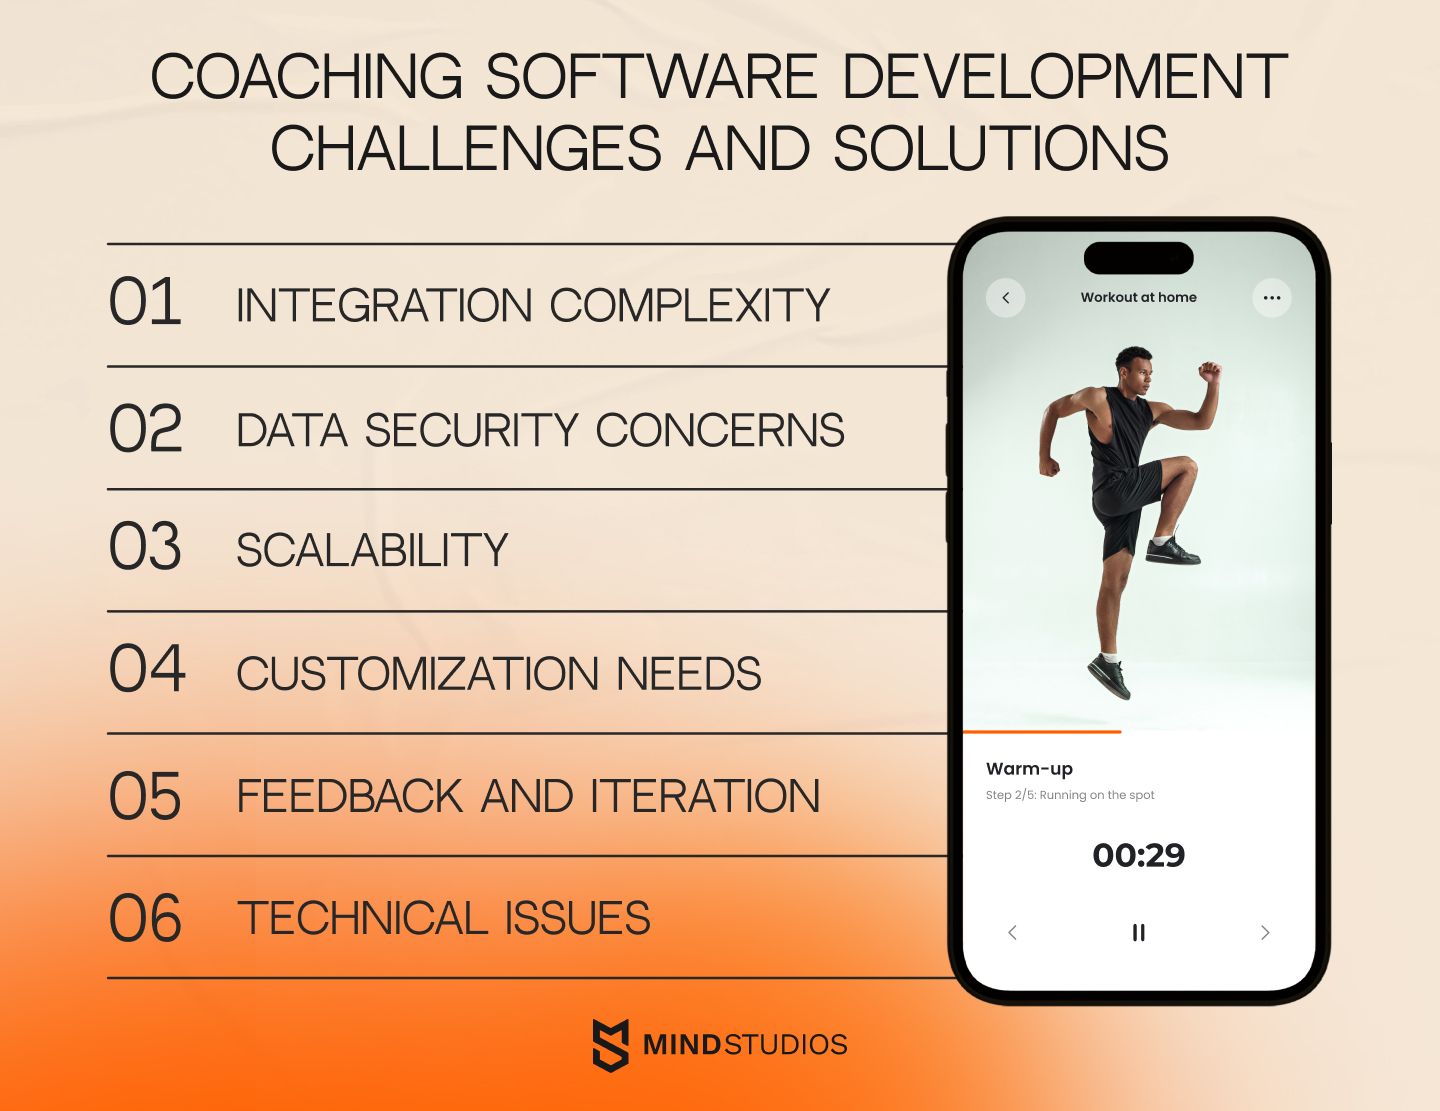 challenges of remote coaching software development